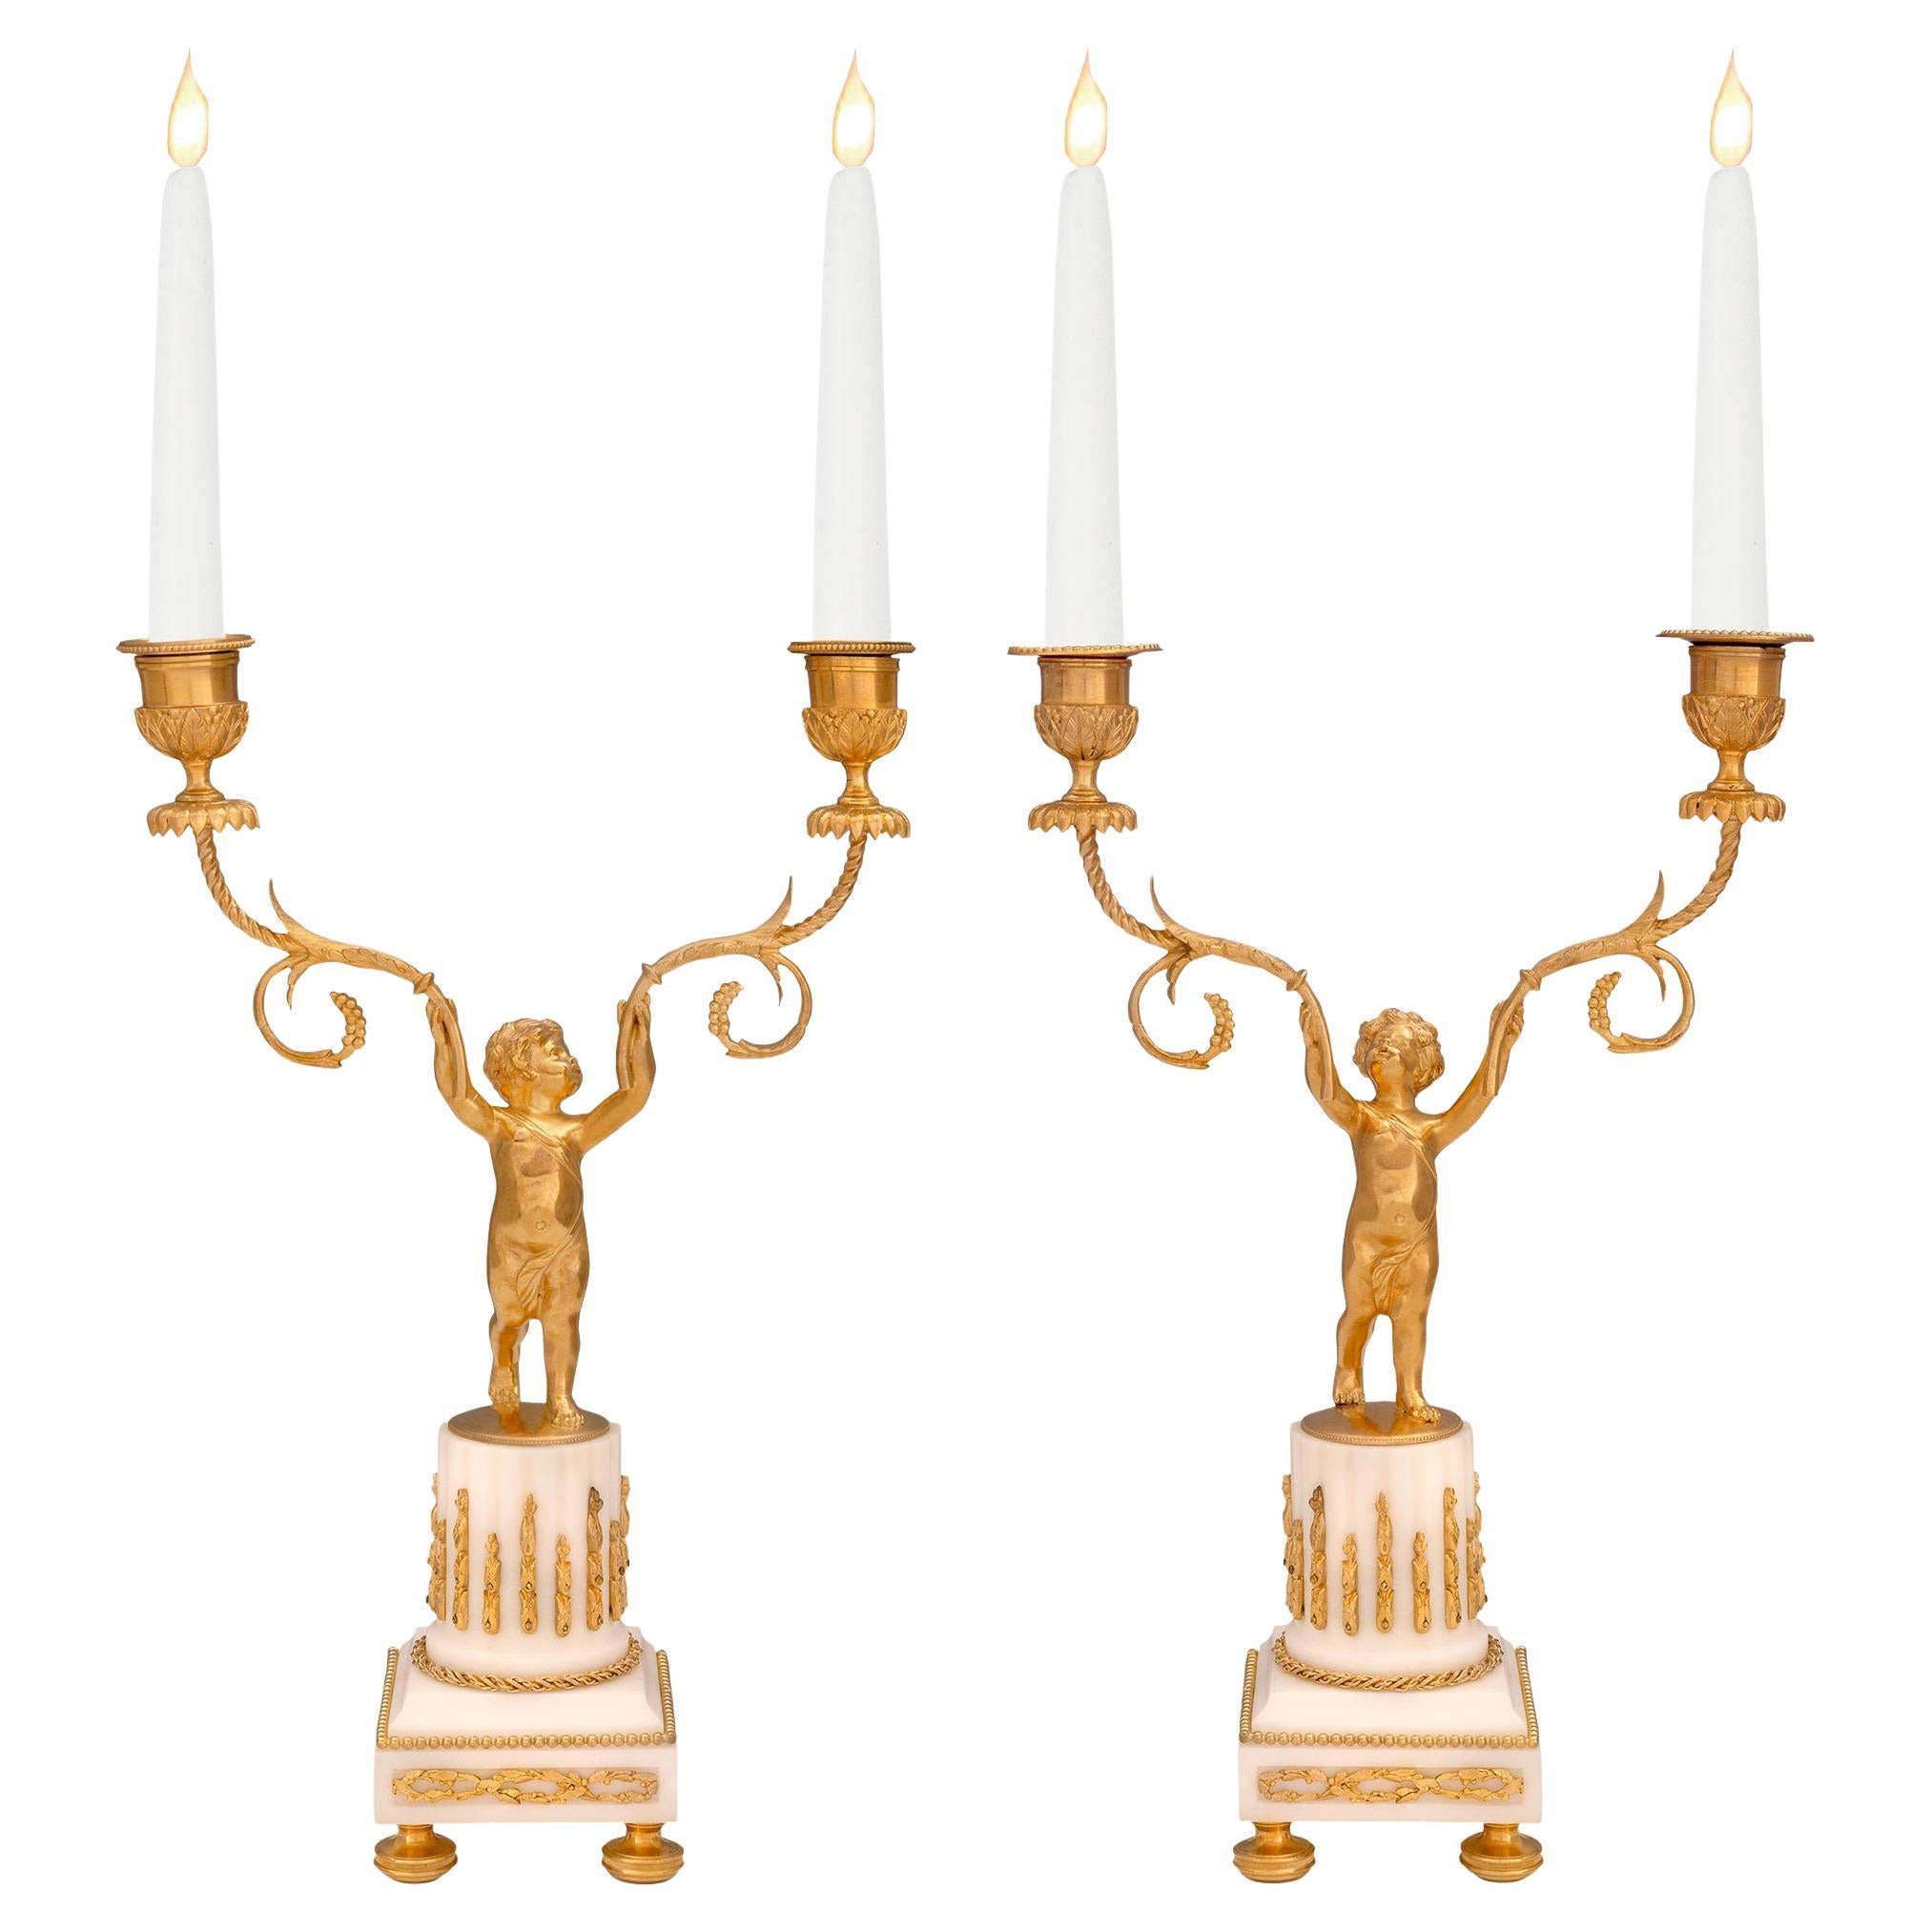 Pair of French 19th Century Louis XVI Style Ormolu and Marble Candelabras For Sale